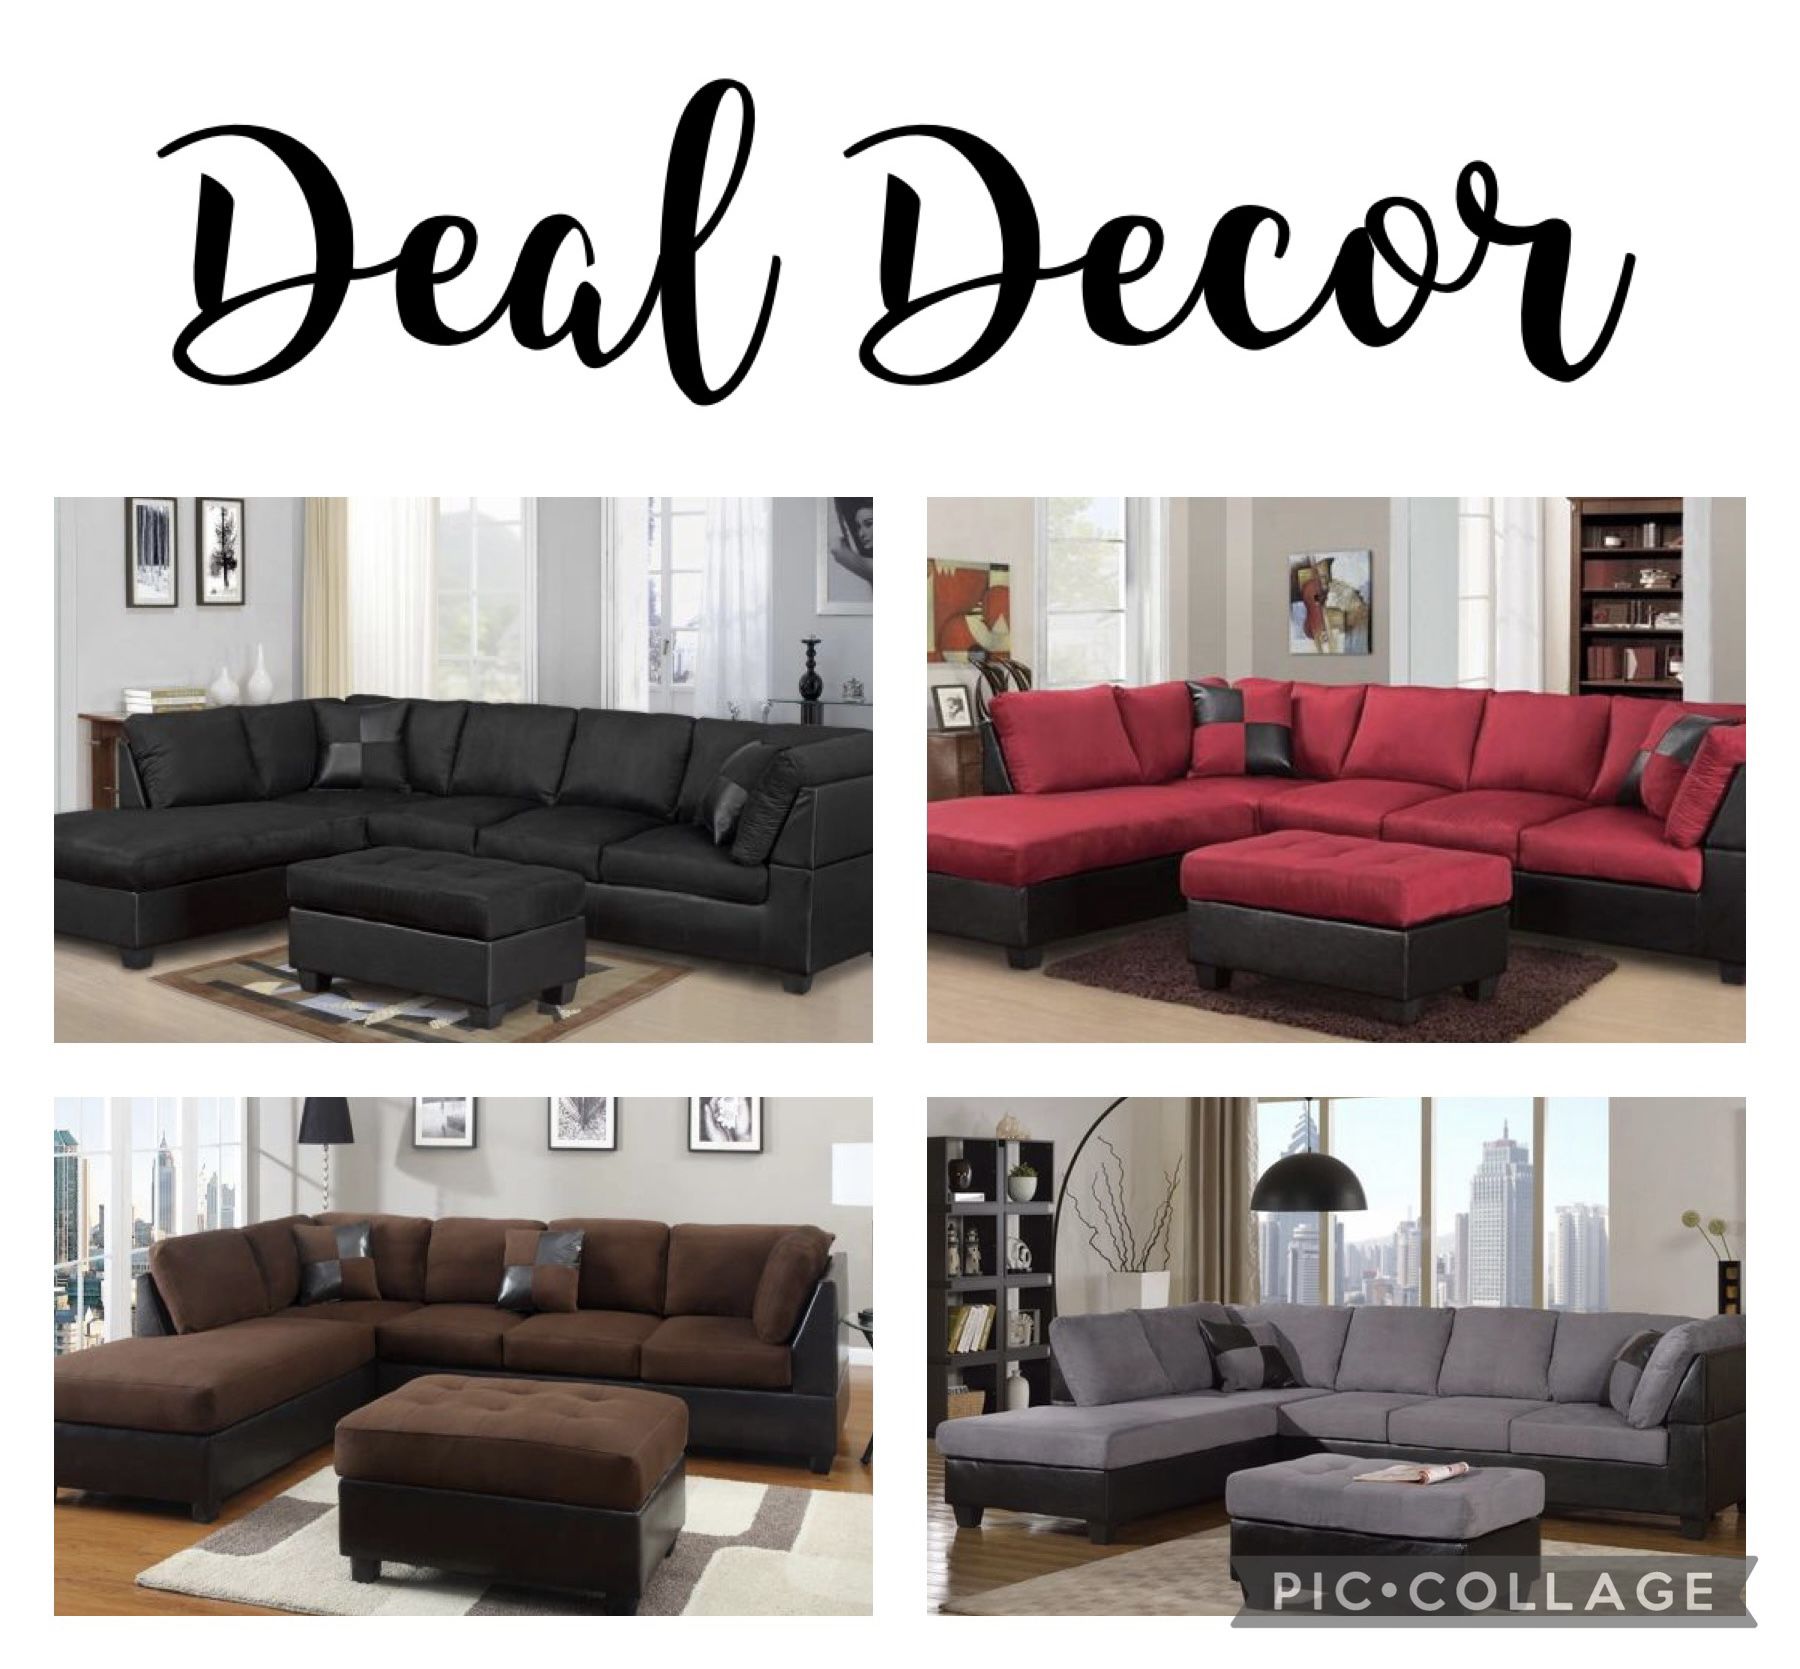 New Microfiber Sectional L-shape Sectional Sofa Couch (red, black, tan, chocolate, gray)